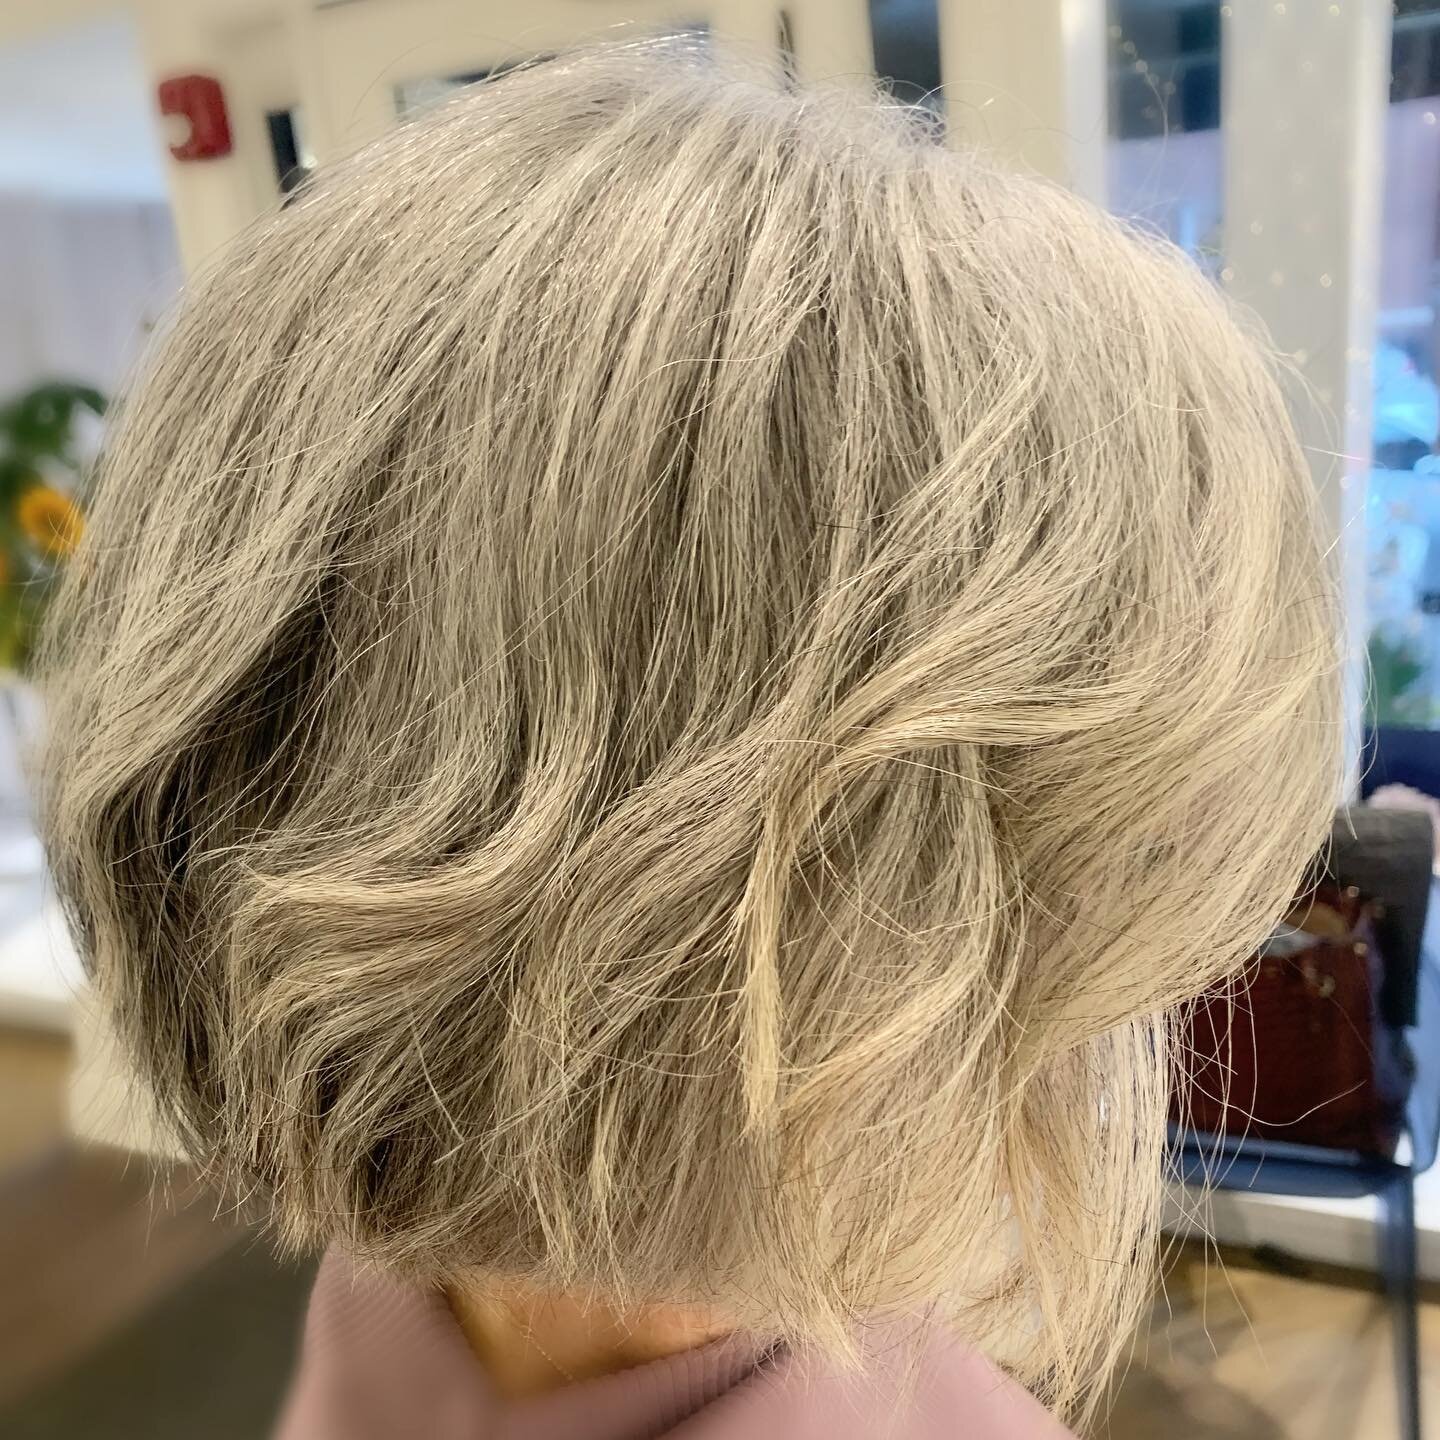 Pro tip: Add some interest and texture to your usual style with the touch of a curling iron or flat iron to create a bend in the hair.

STYLIST: Haircut &amp; Style by Lois 
.
.
.
.
#haircut #naturalhair #waves #texture #hairstyle #beauty #salon #whi